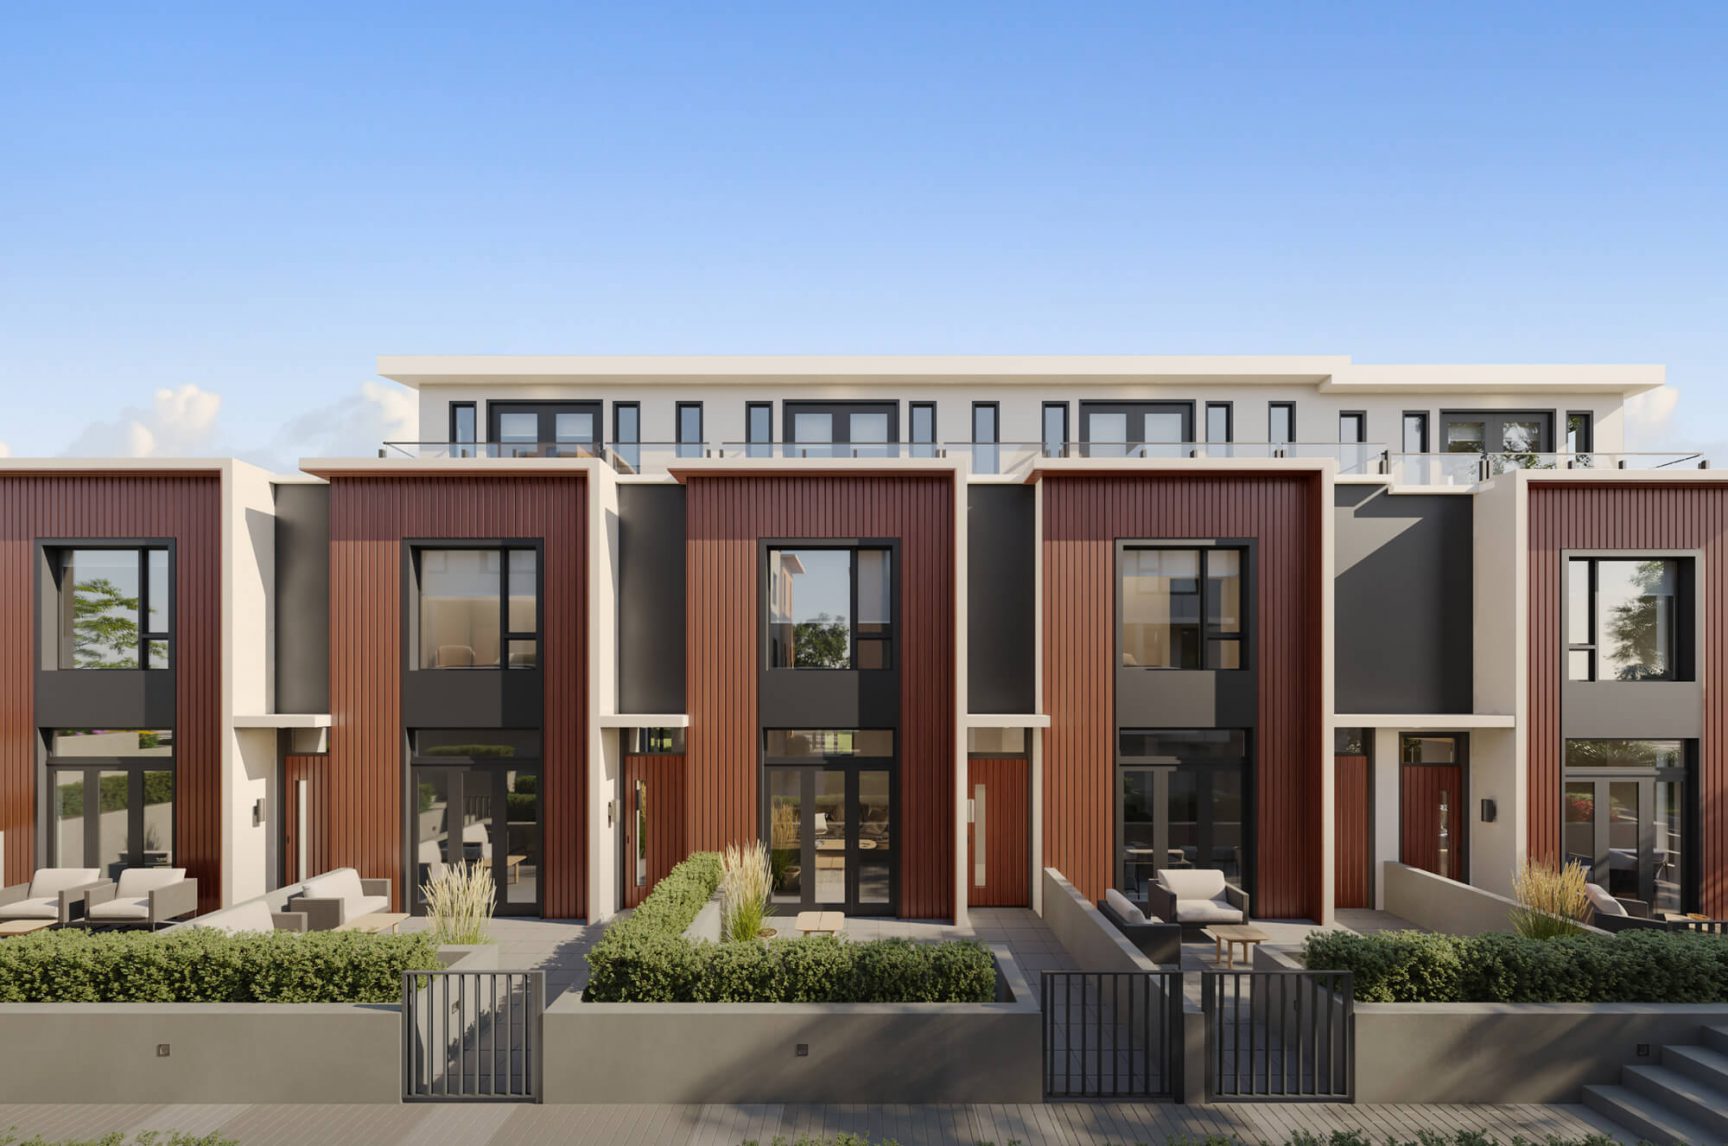 A collection of 17 luxury West Side townhomes and garden flats.